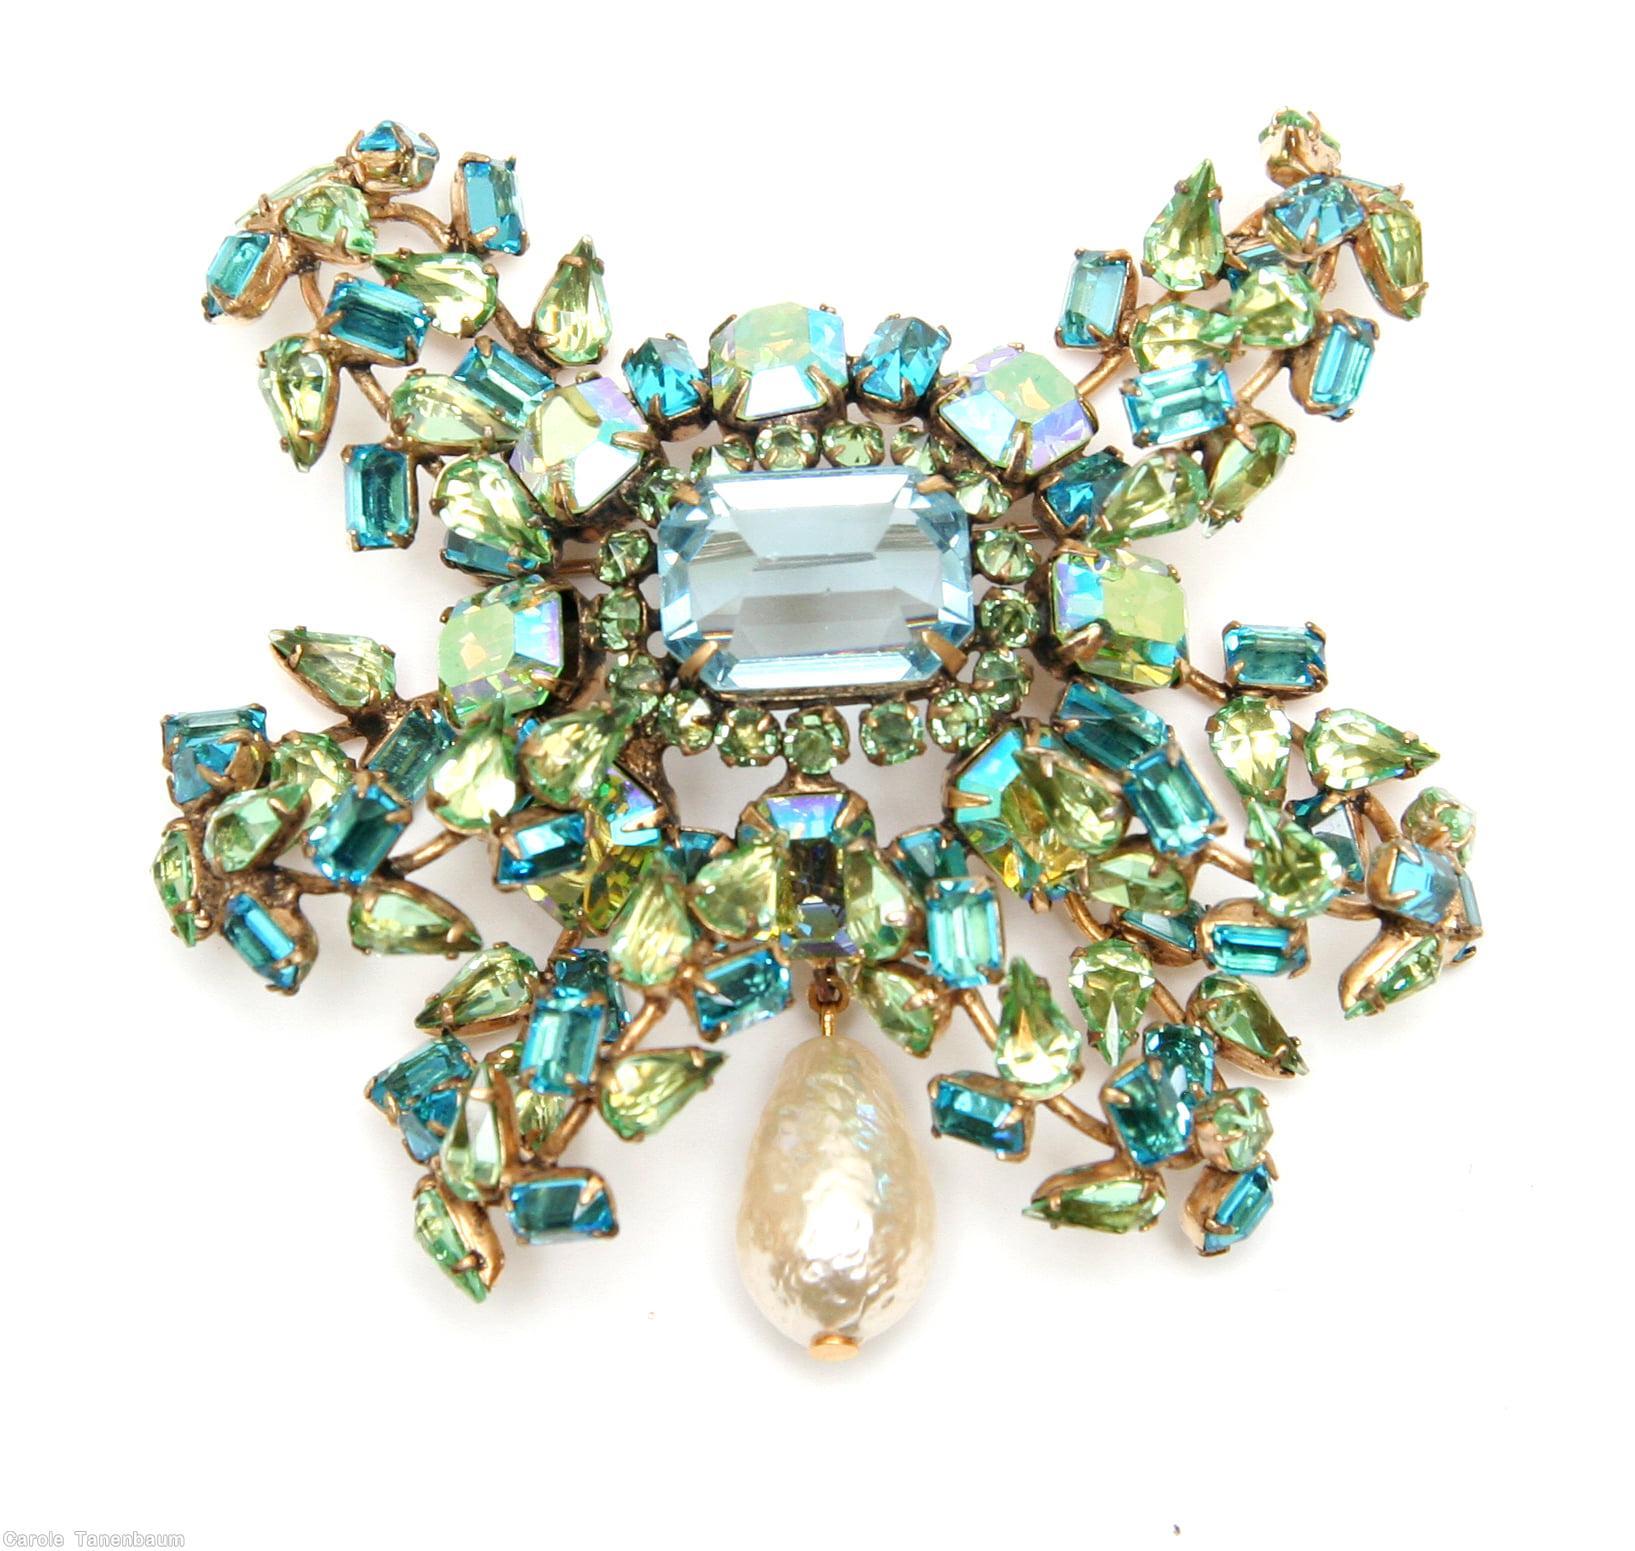 Schreiner 6 flower branch large sprawling 1 dangle pin large square center 16 surrounding small chaton 1 large dangling teardrop apple green teardrop aqua baguette large large faceted emerald cut aquamarine center large baroque pearl goldtone jewelry